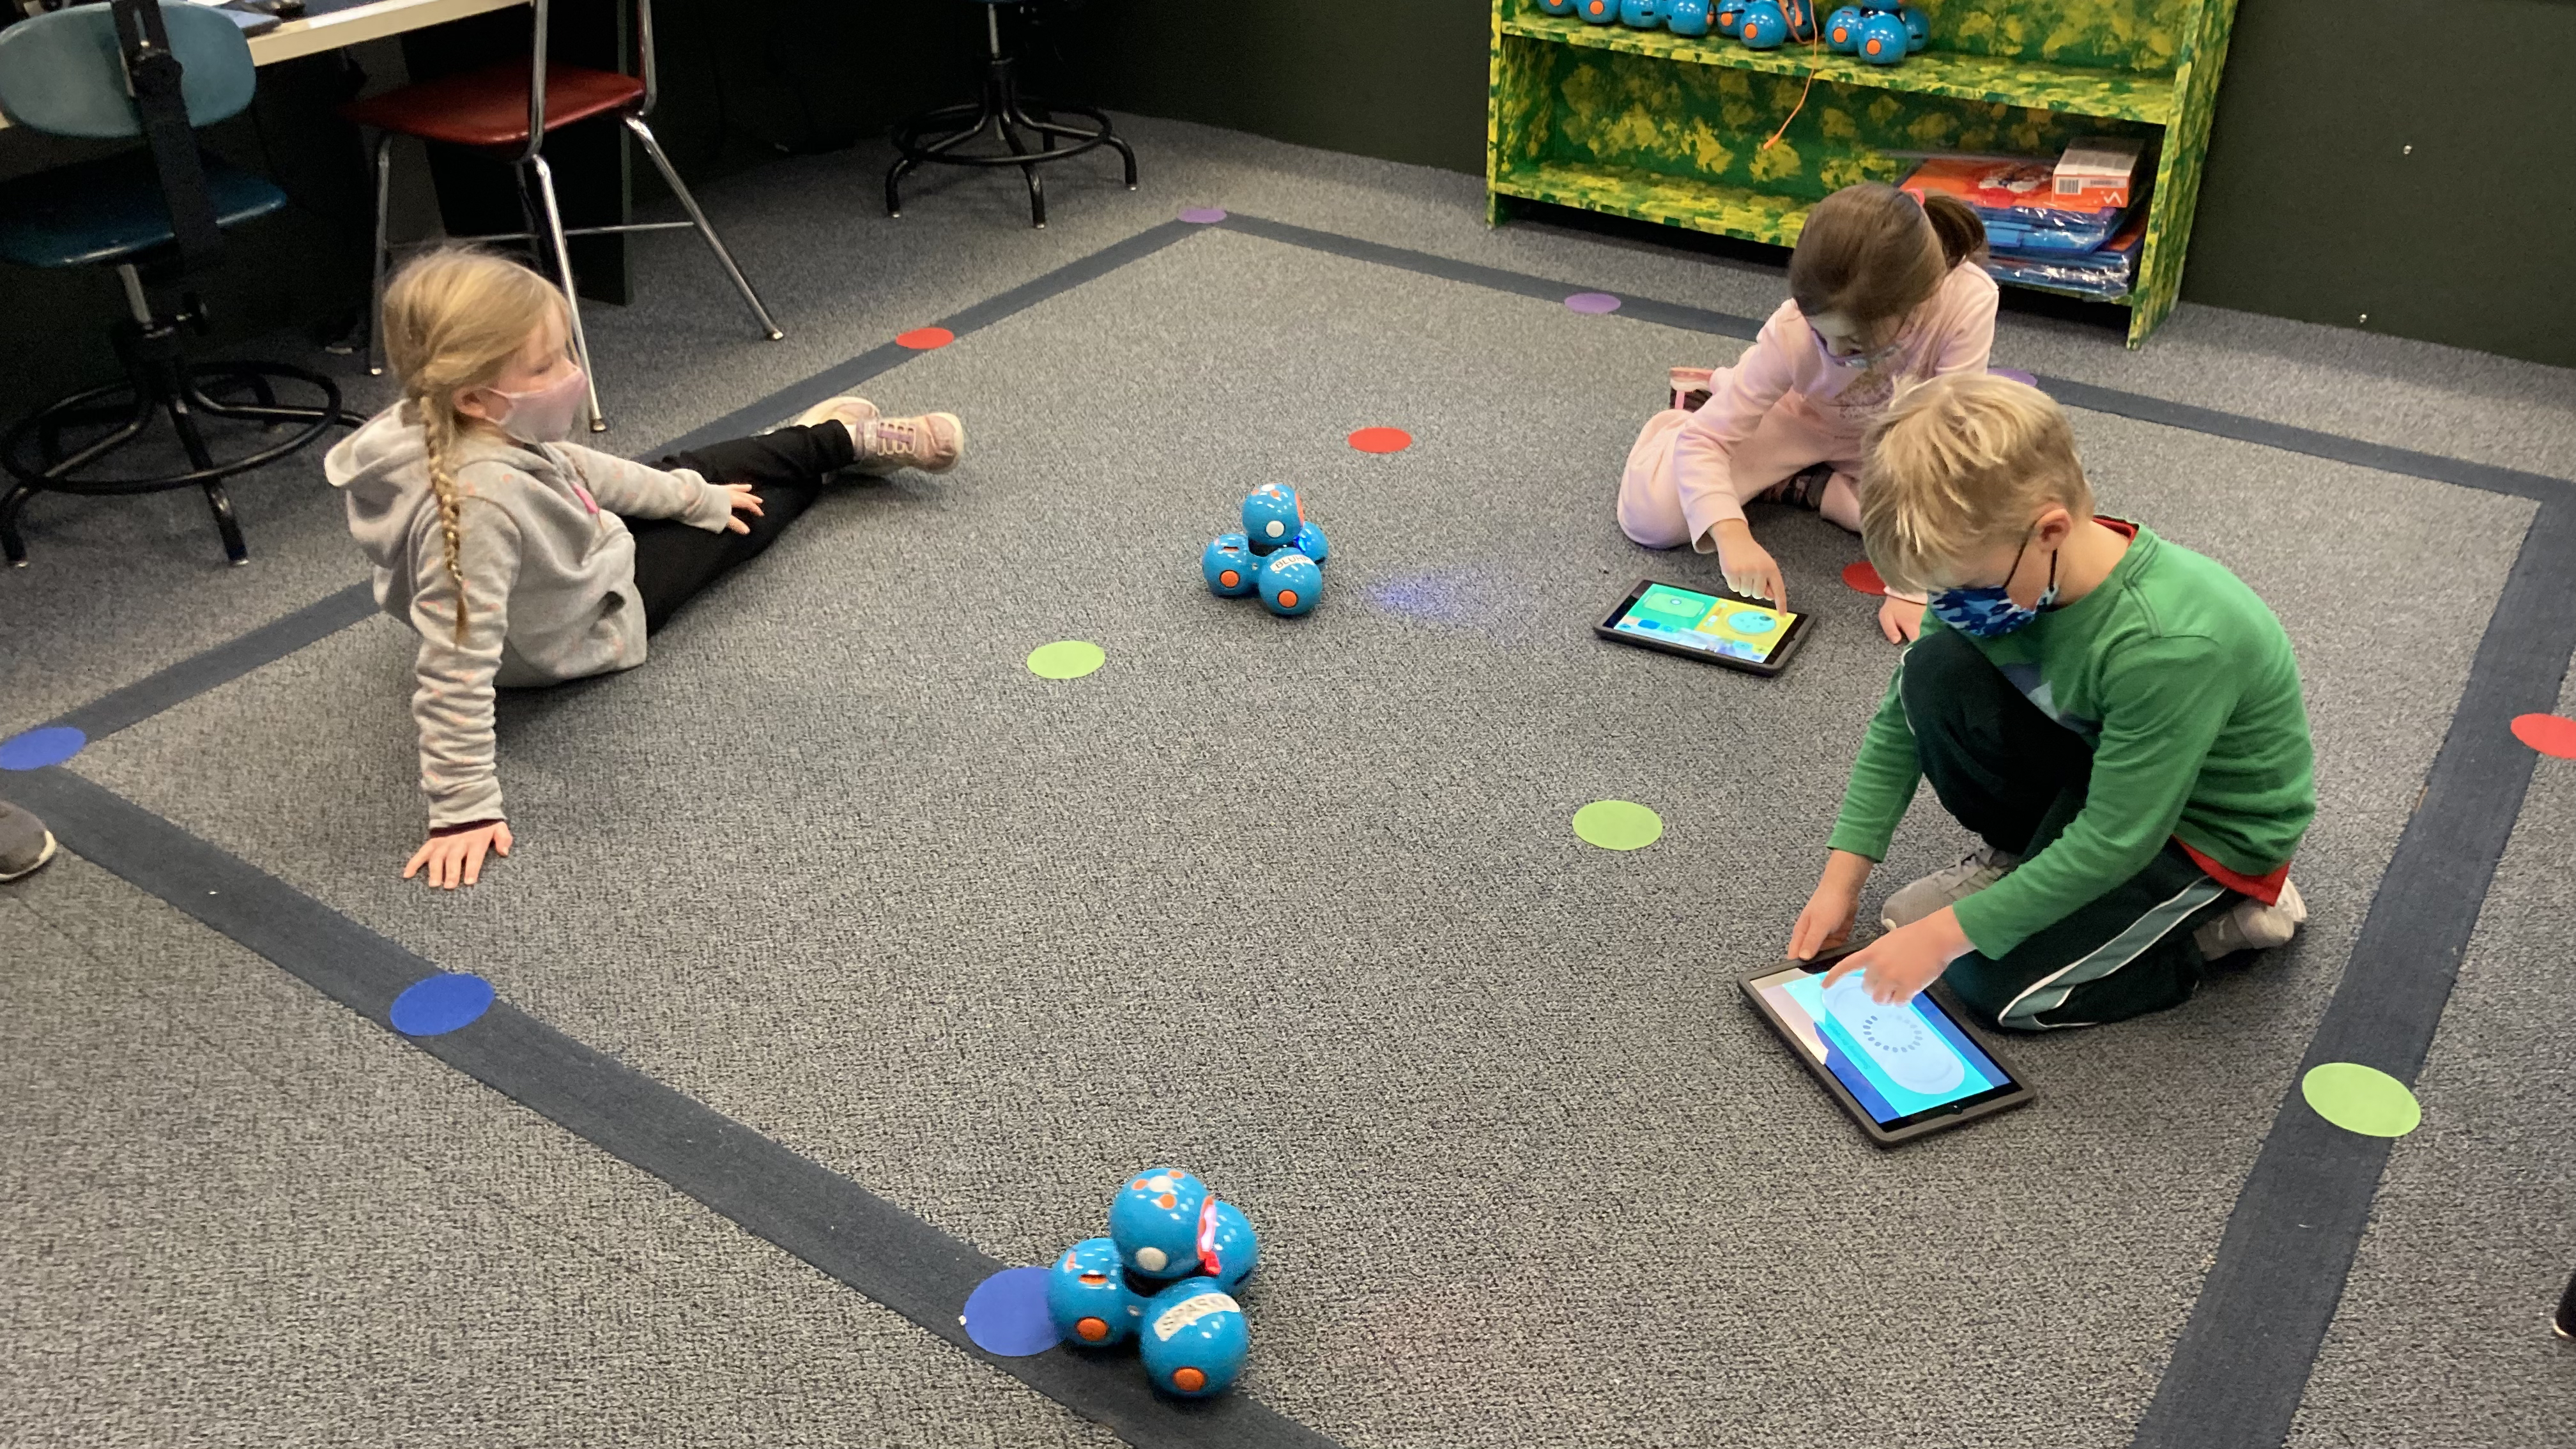 Students Playing with Robots